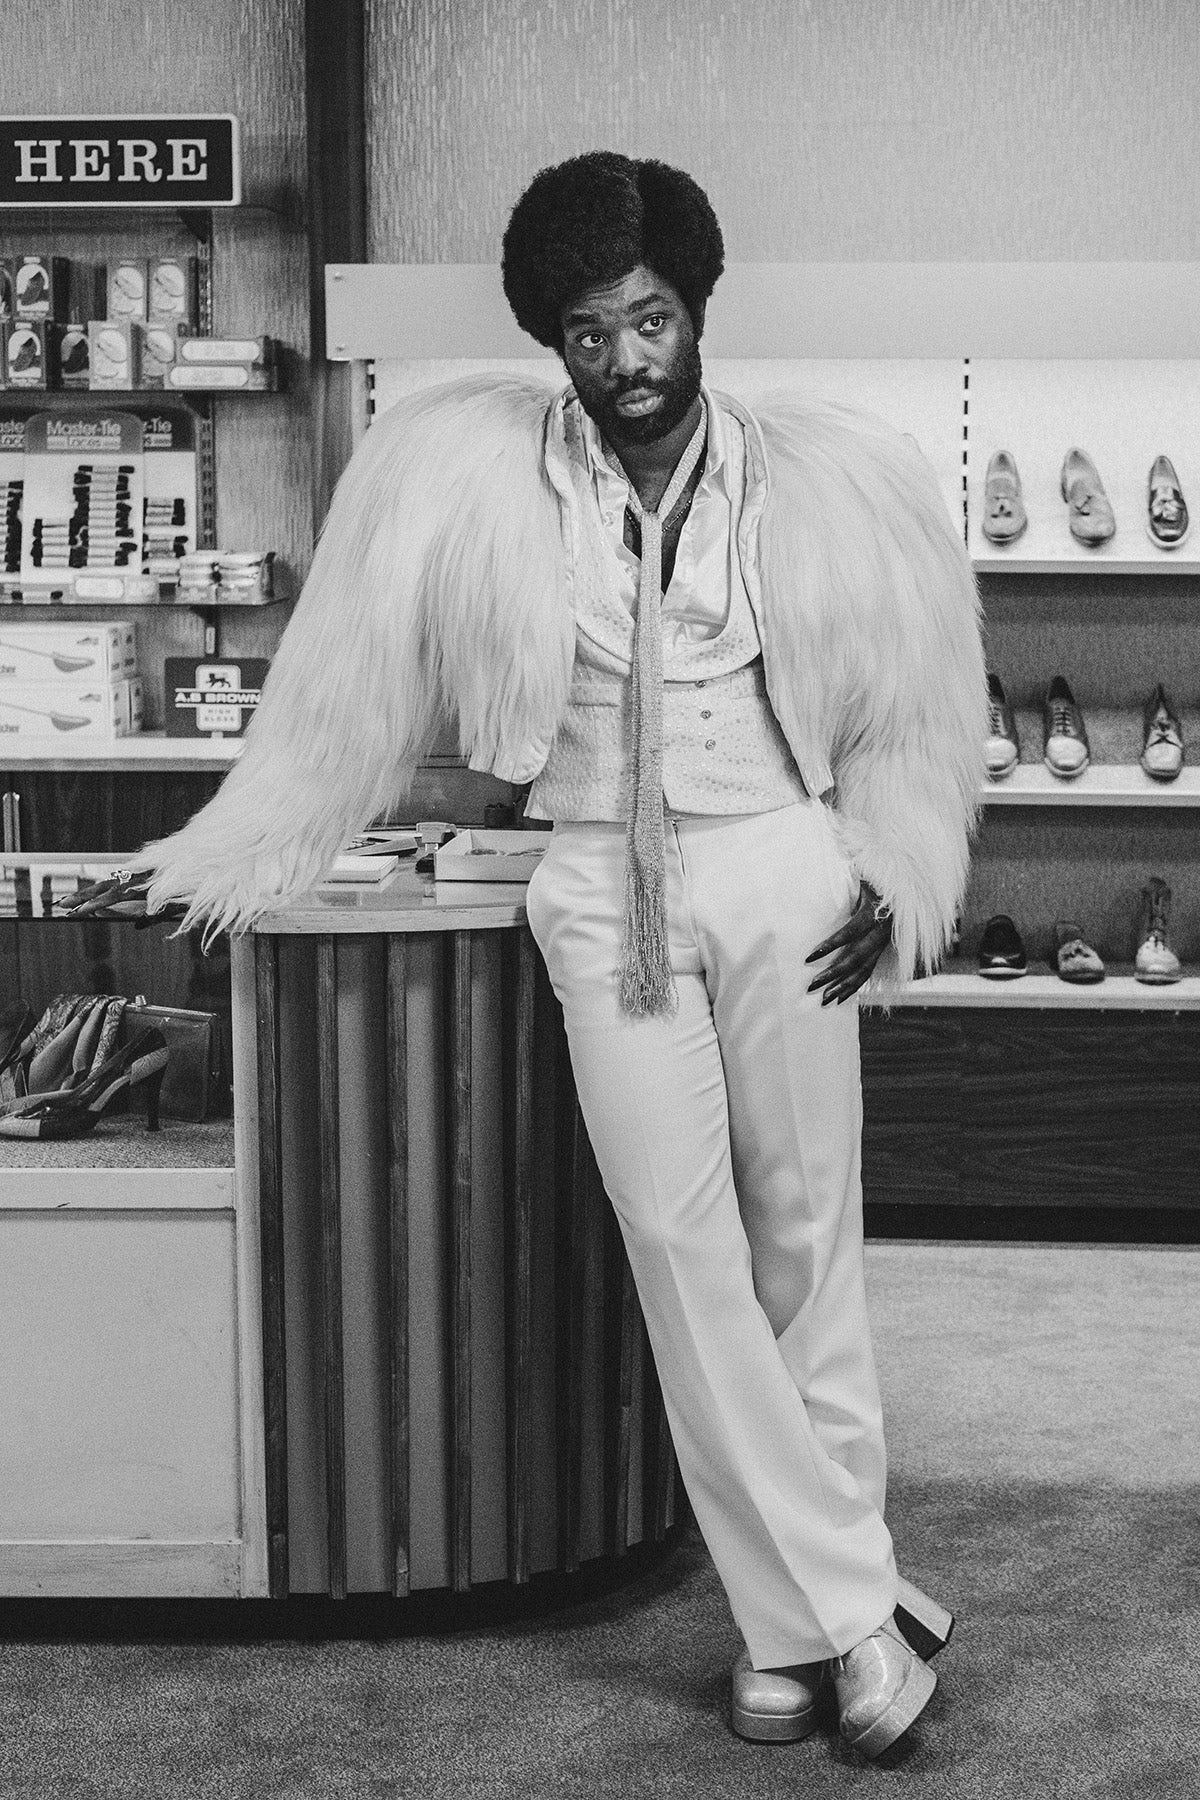 Black and white photograph by David Hurn showing Black Mirror stars Paapa Essiedu in a light feather jacket, slim pale trousers, and a skinny piece of fabric tied around his neck, leaning on a podium in front of racks of shoes